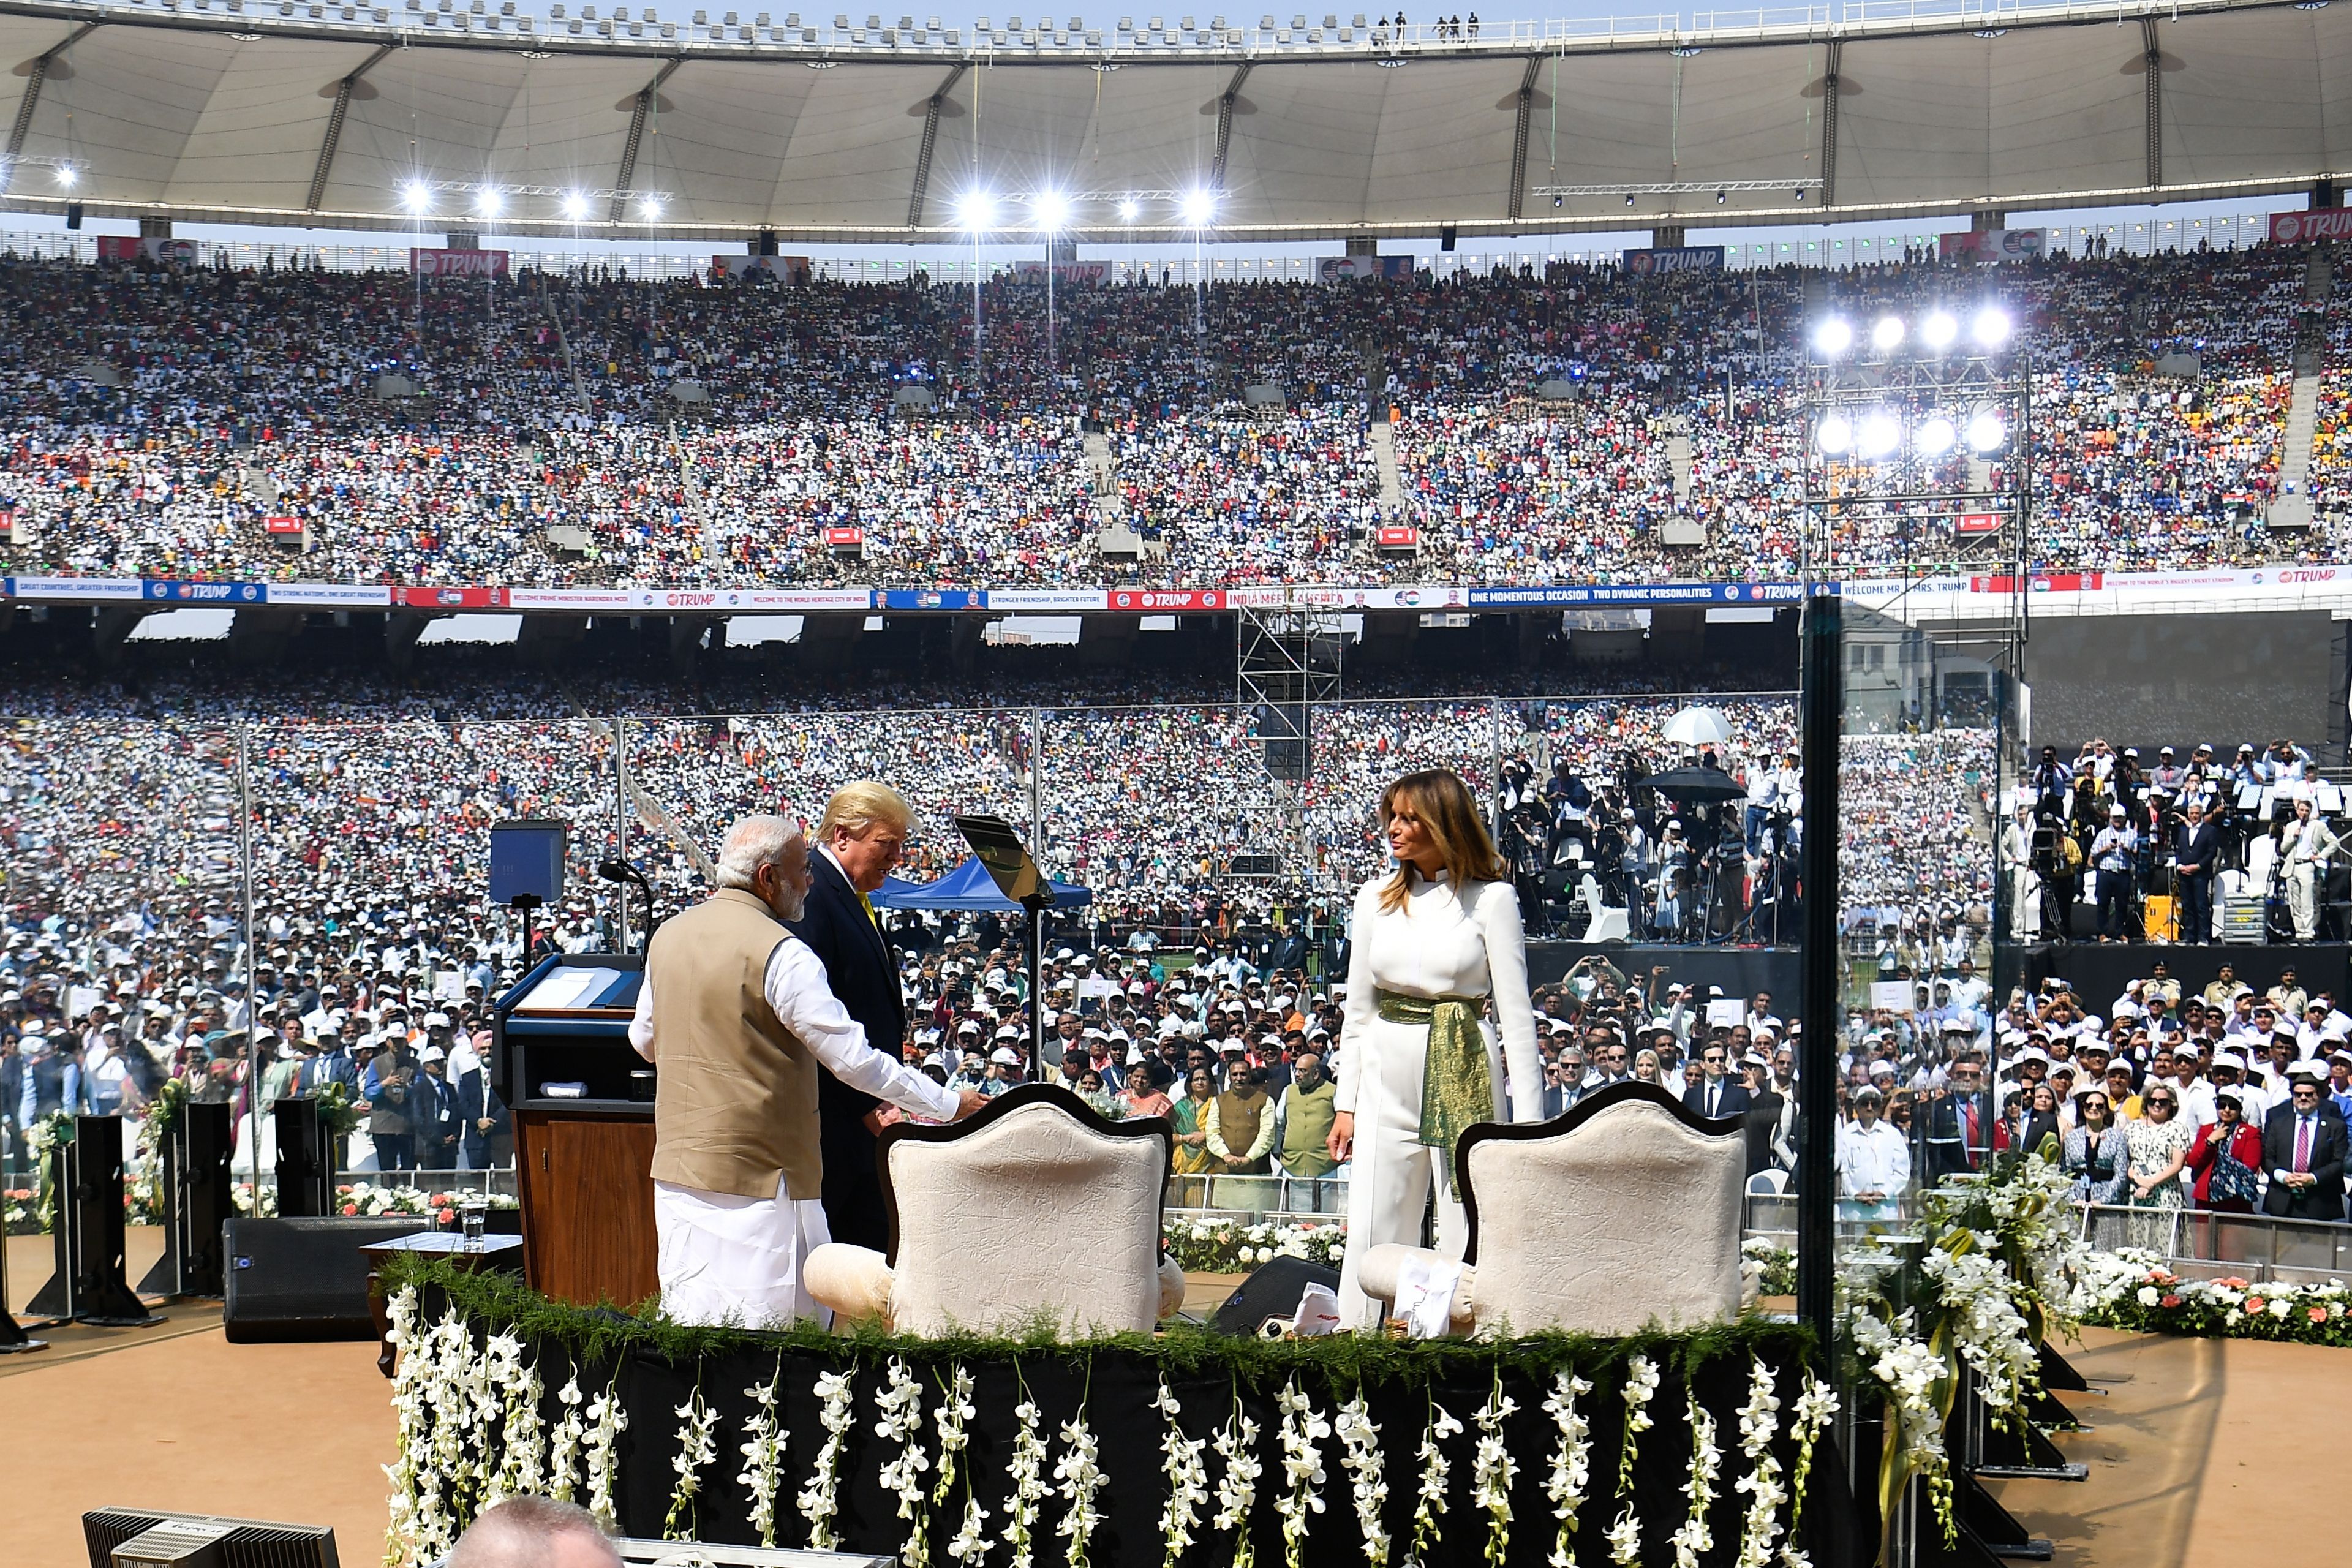 Trump (C), First Lady Melania Trump (R) and India's Prime Minister Narendra Modi arrive to attend 'Namaste Trump' rally at Sardar Patel Stadium in Motera, on the outskirts of Ahmedabad, on February 24